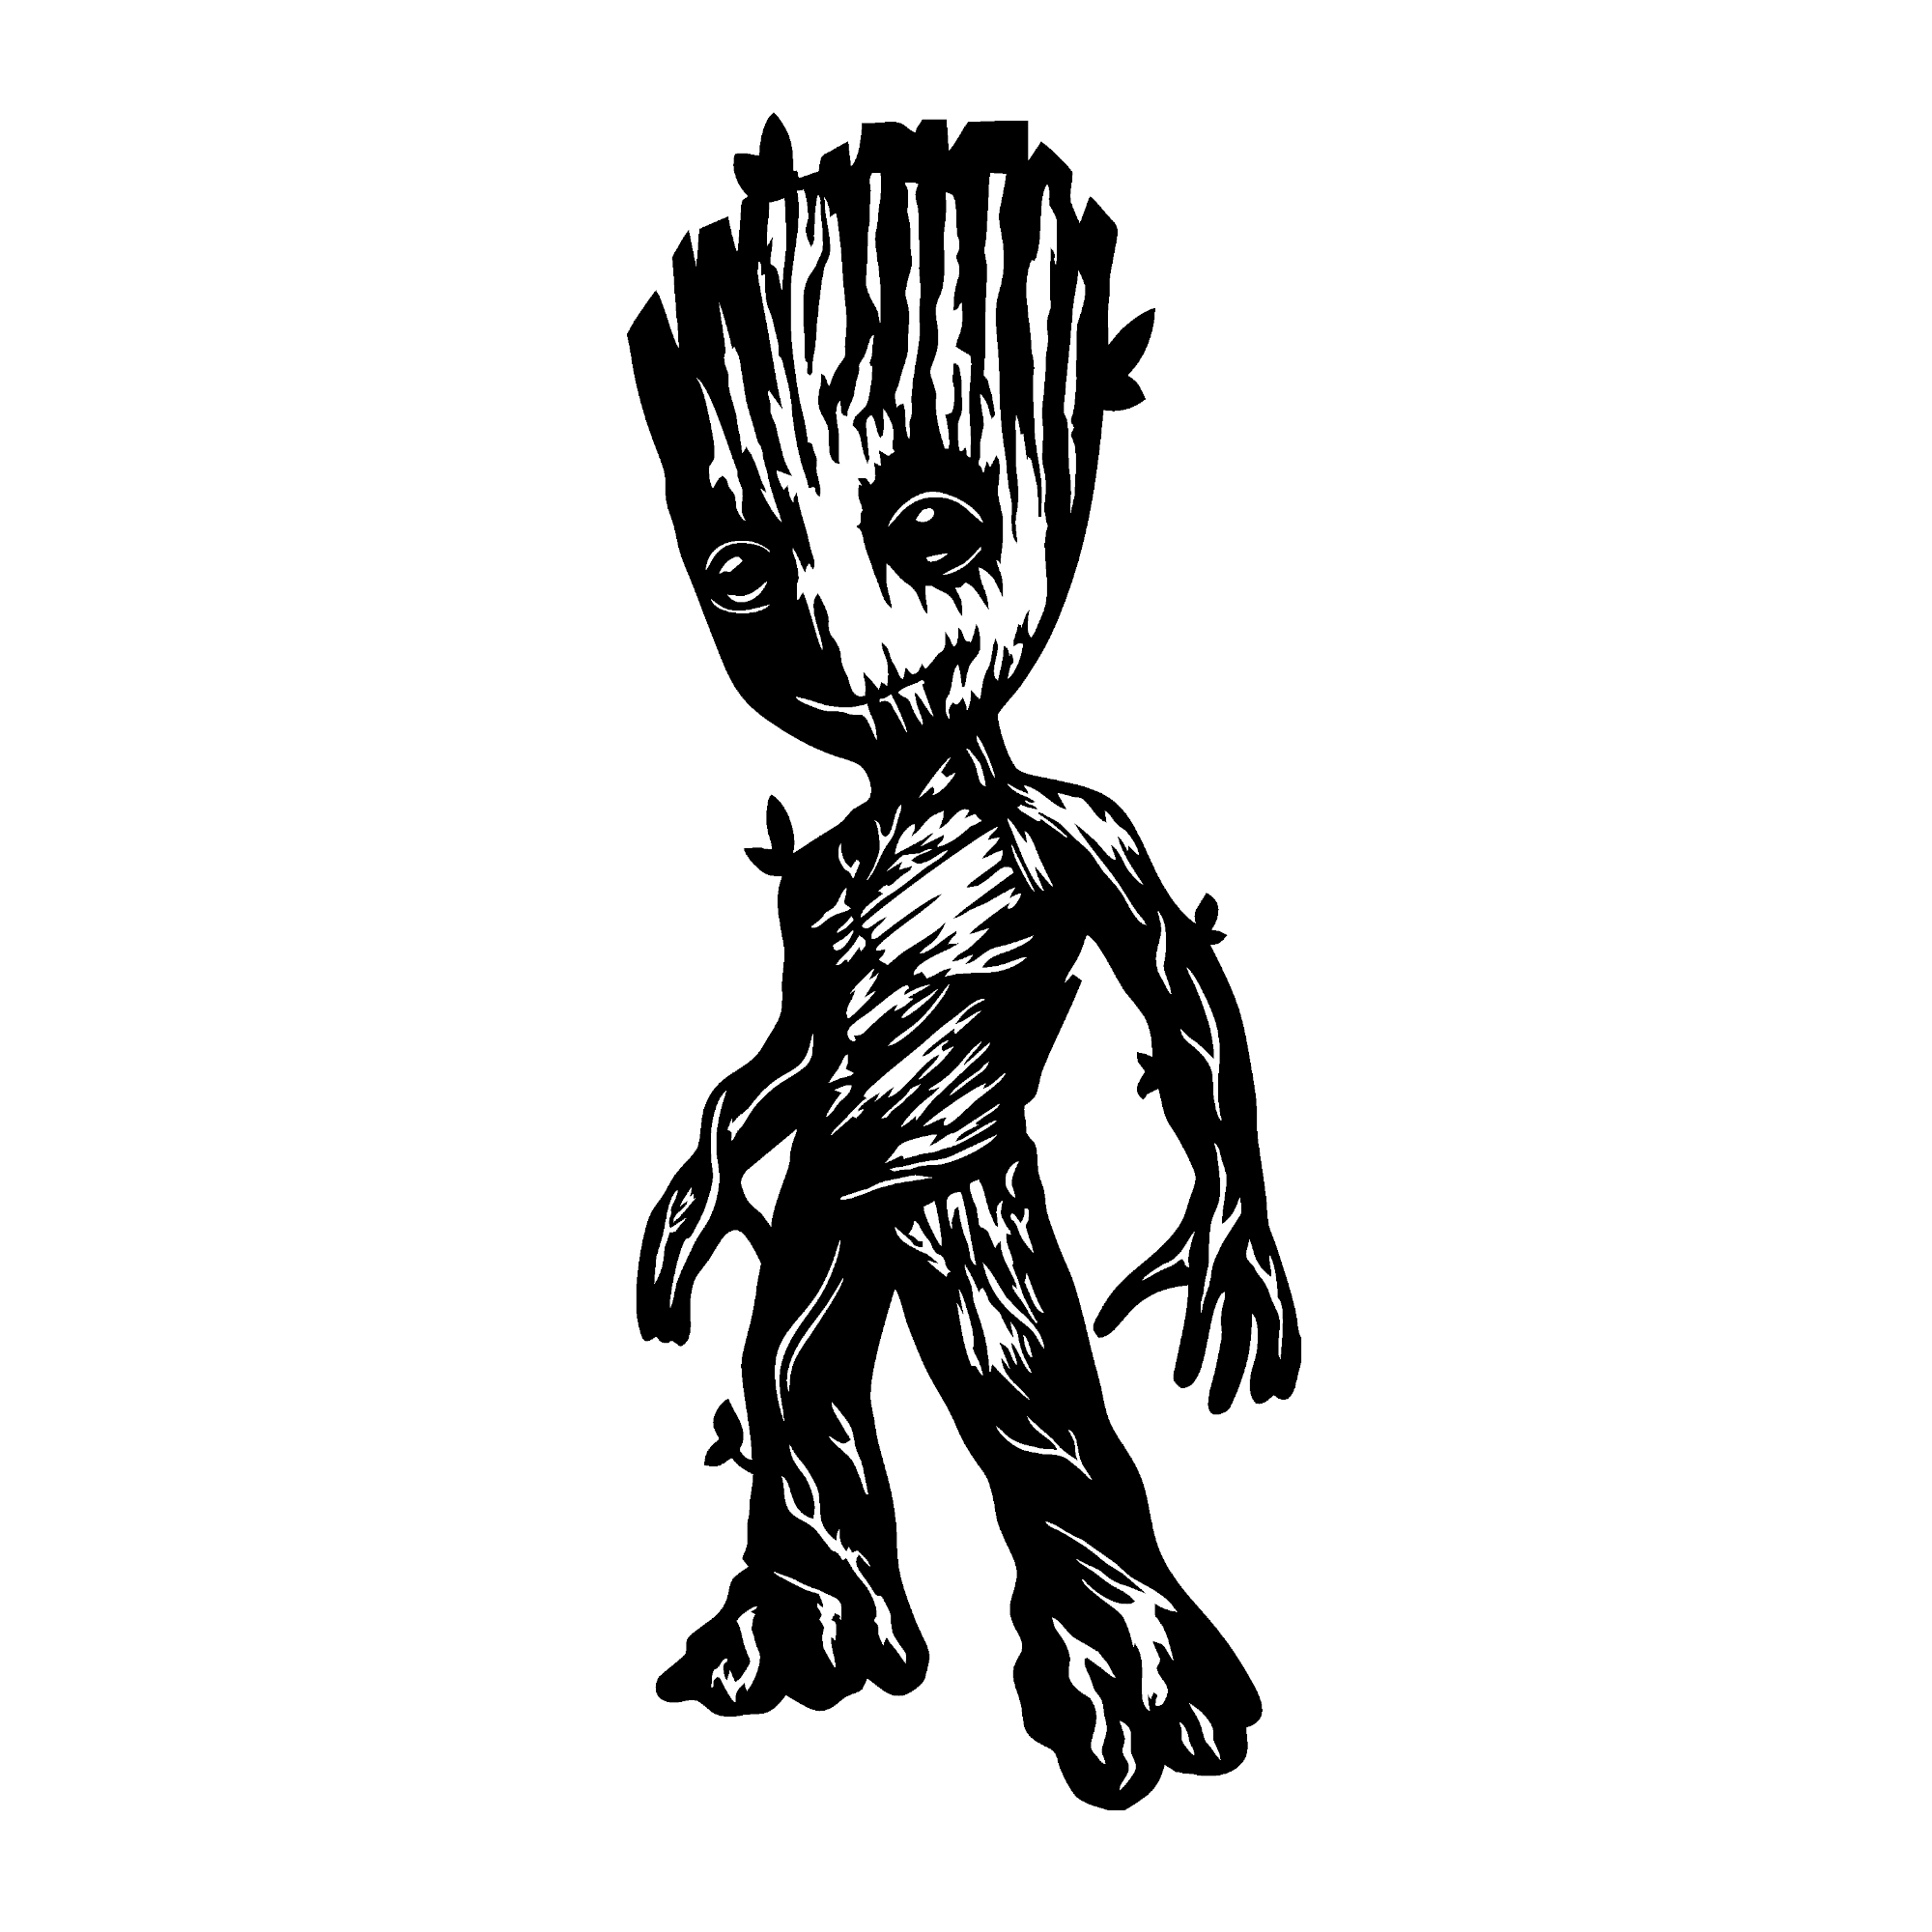 Guardians of the Galaxy - Baby Groot freundlich